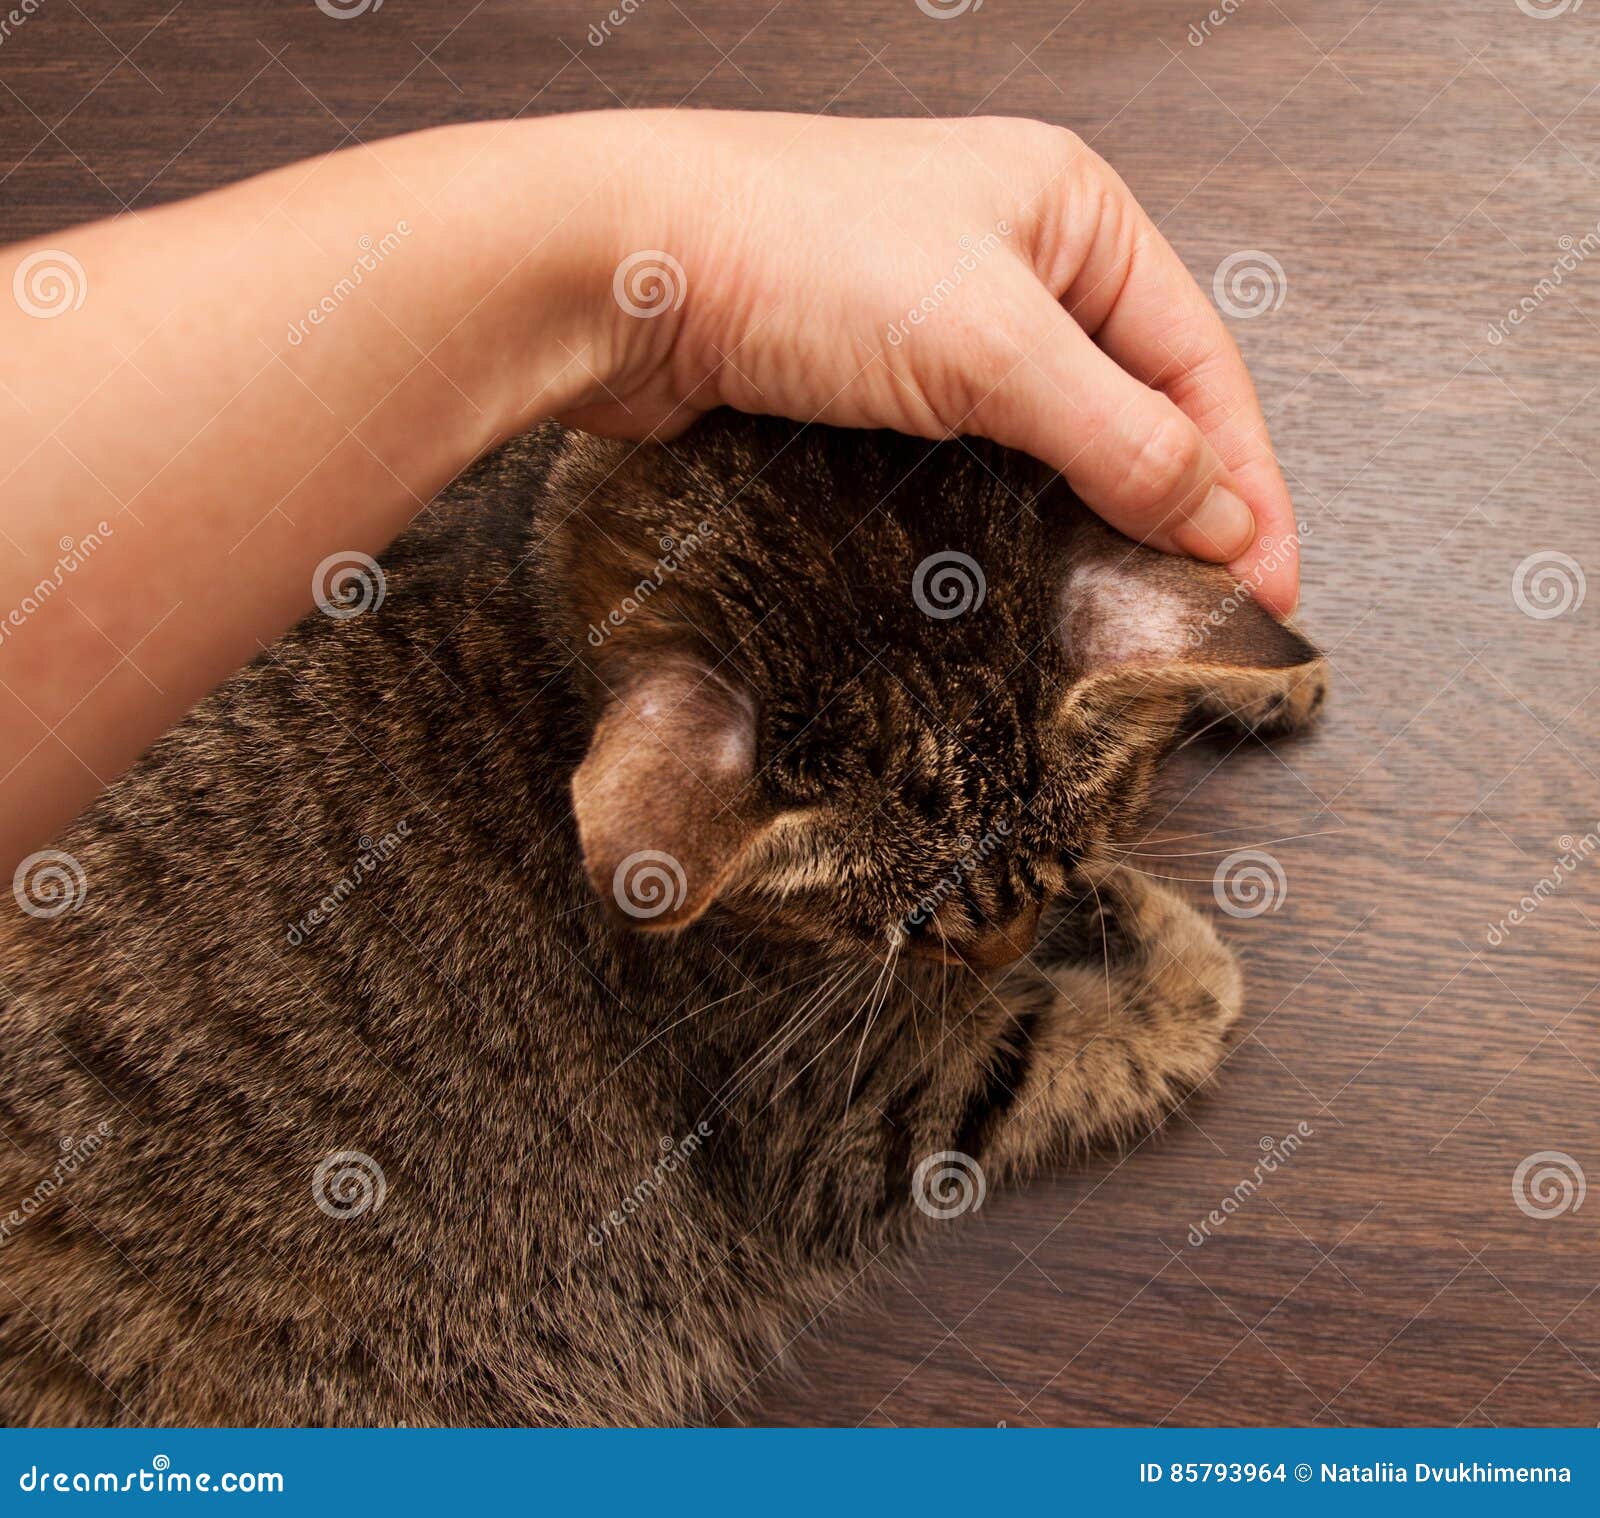 Ringworm In Cat Stock Photo Image Of Fight Head Hairless 85793964